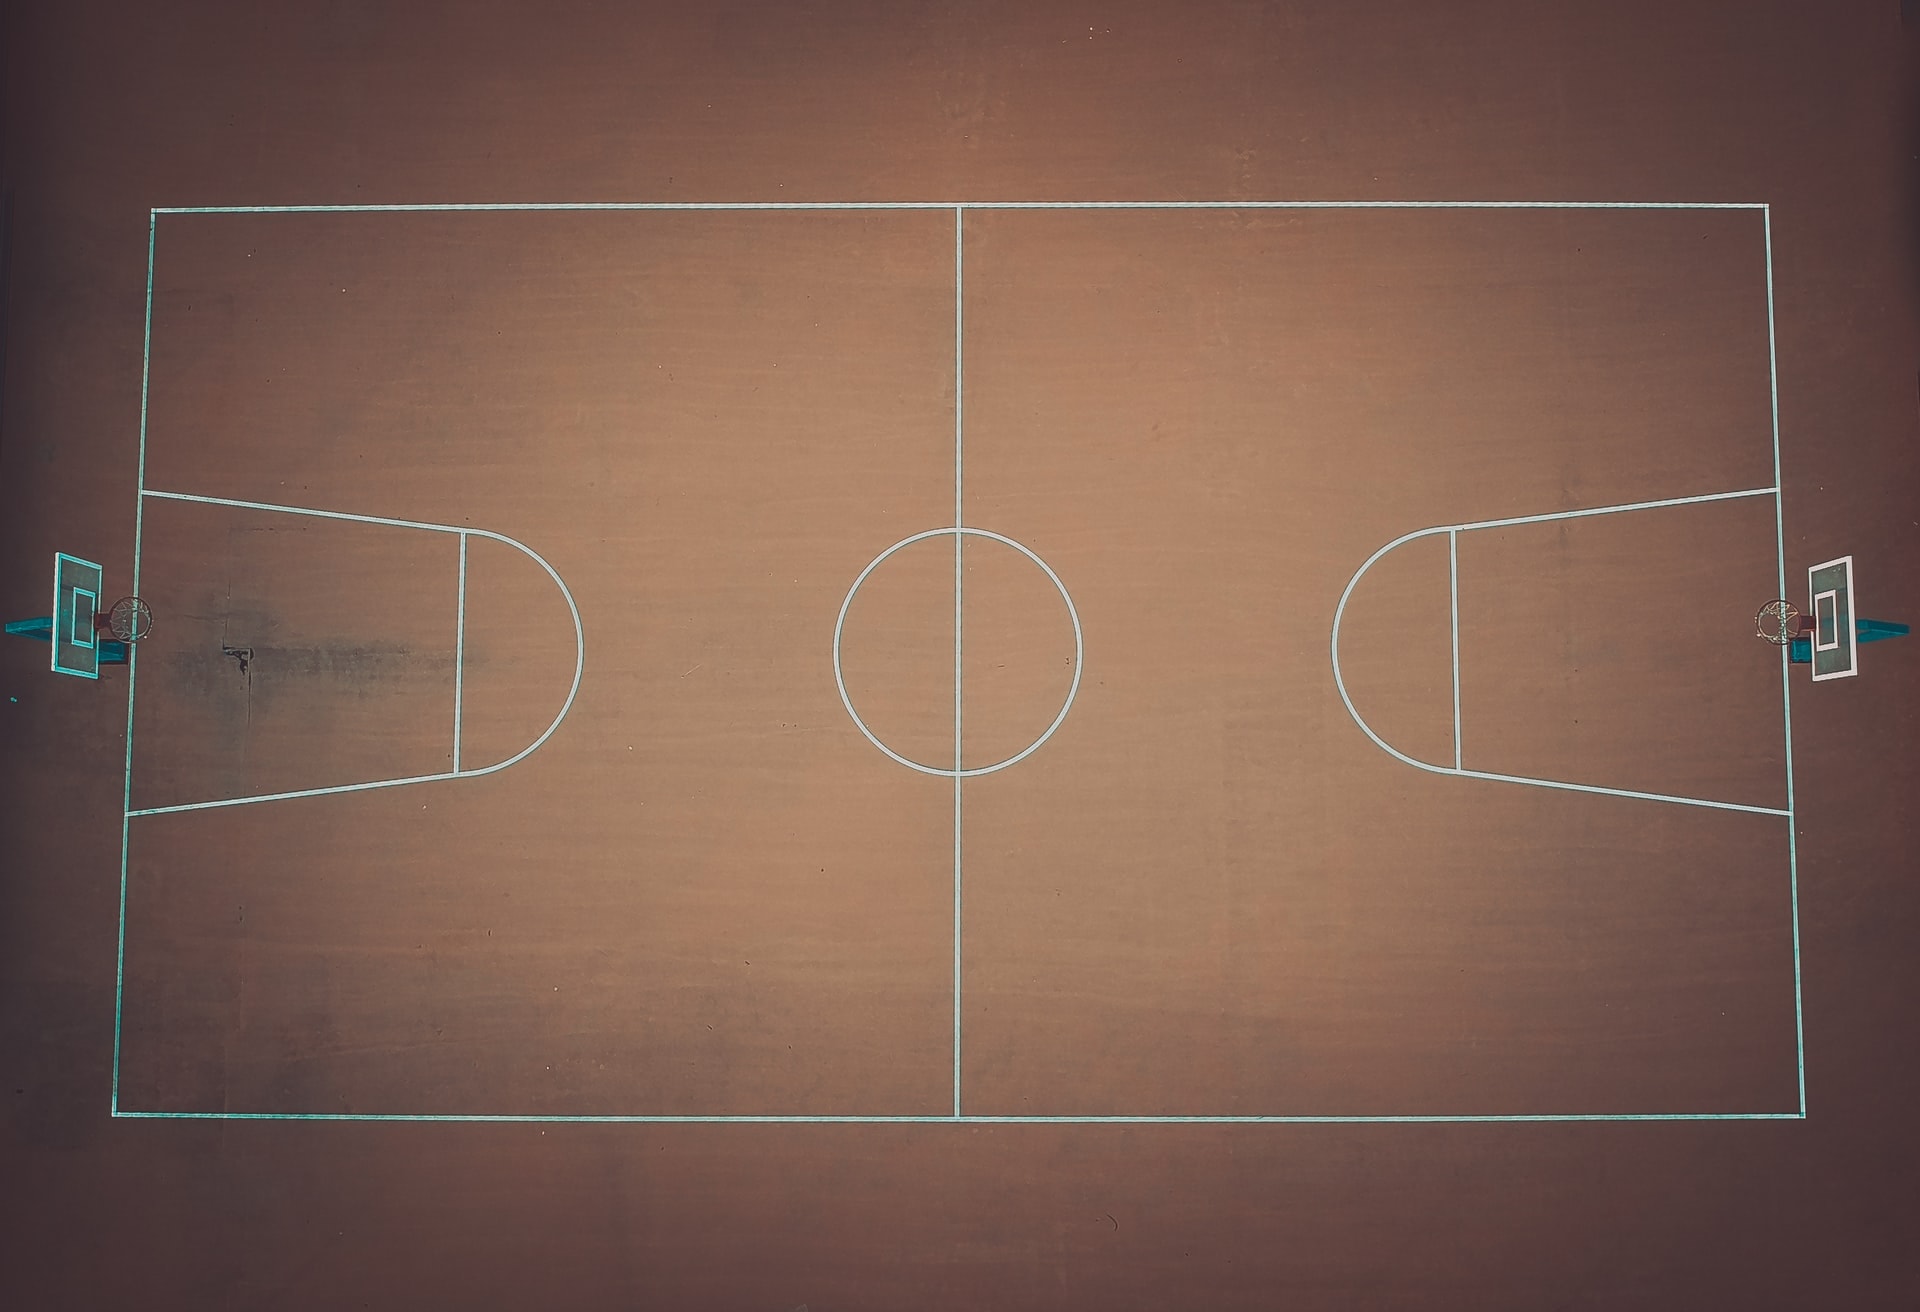 History of the Basketball Court